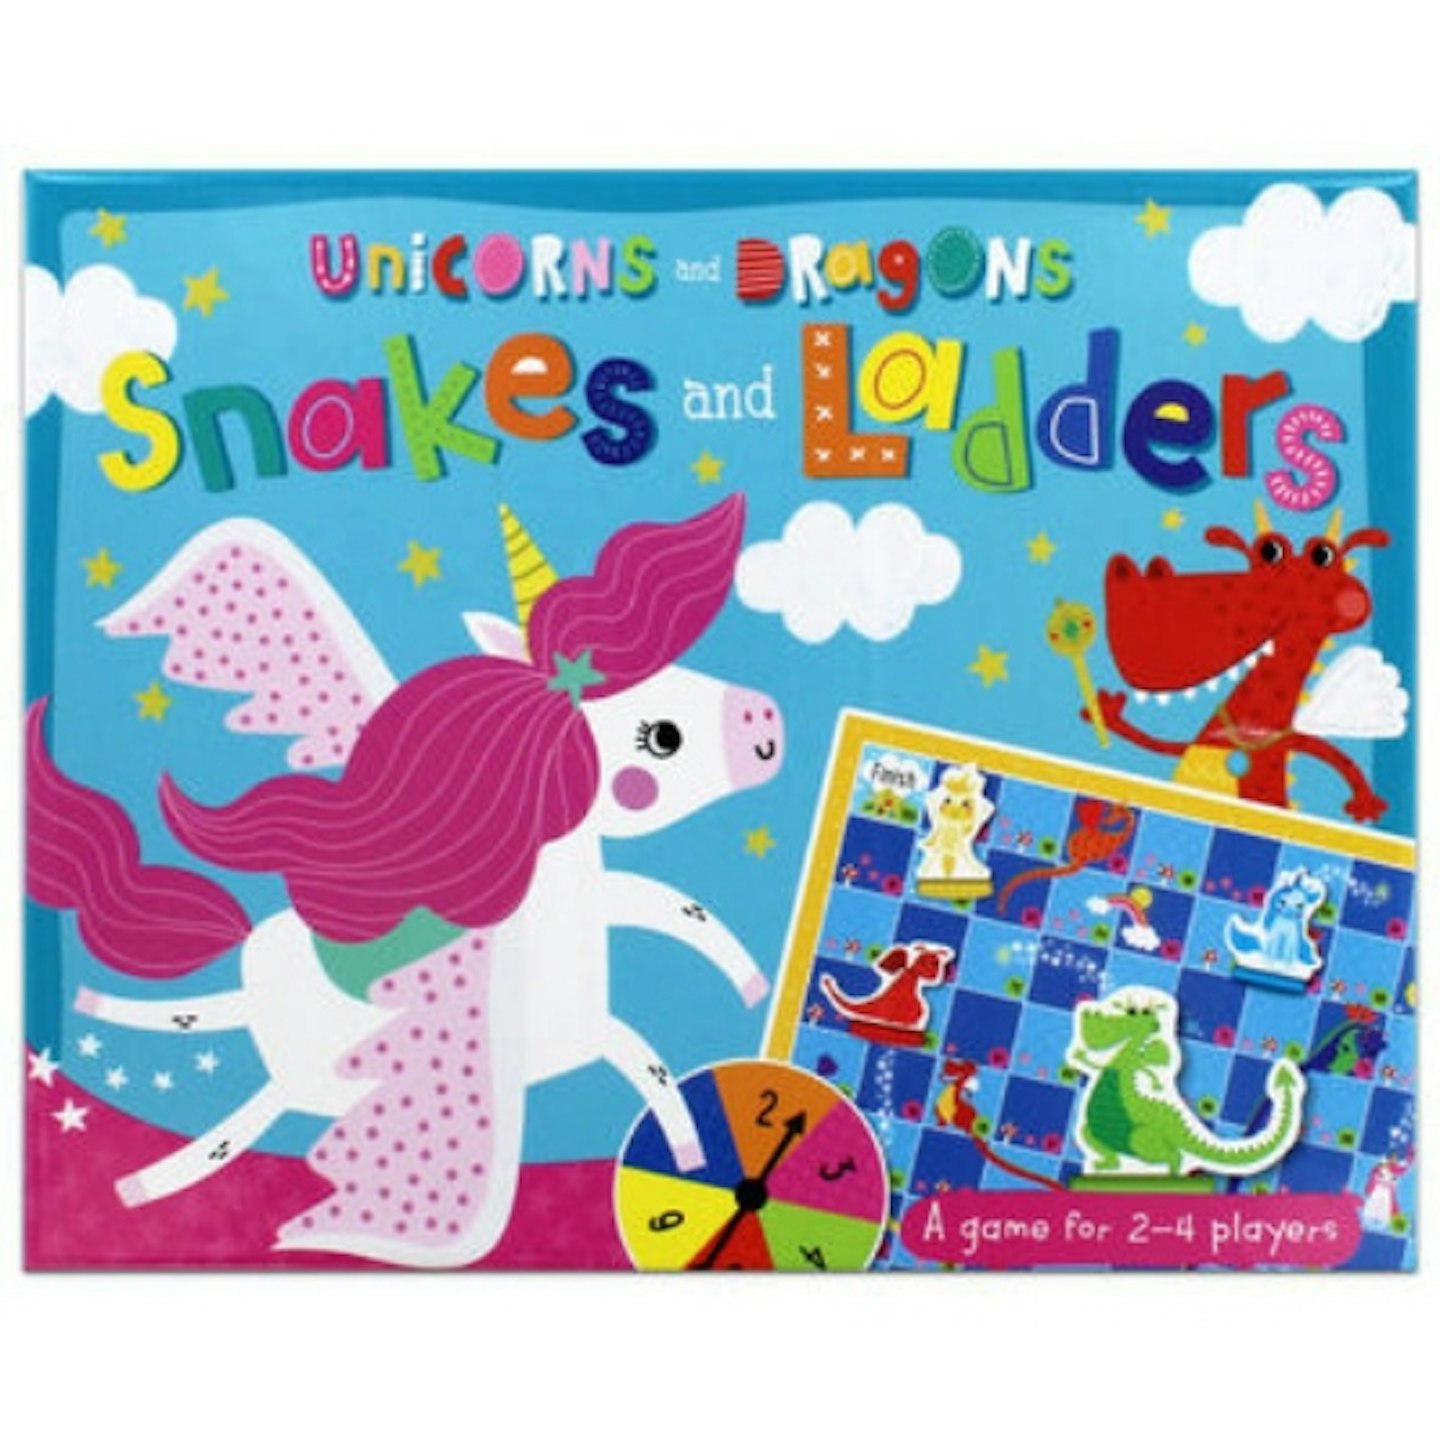 Unicorns and Dragons Snakes and Ladders